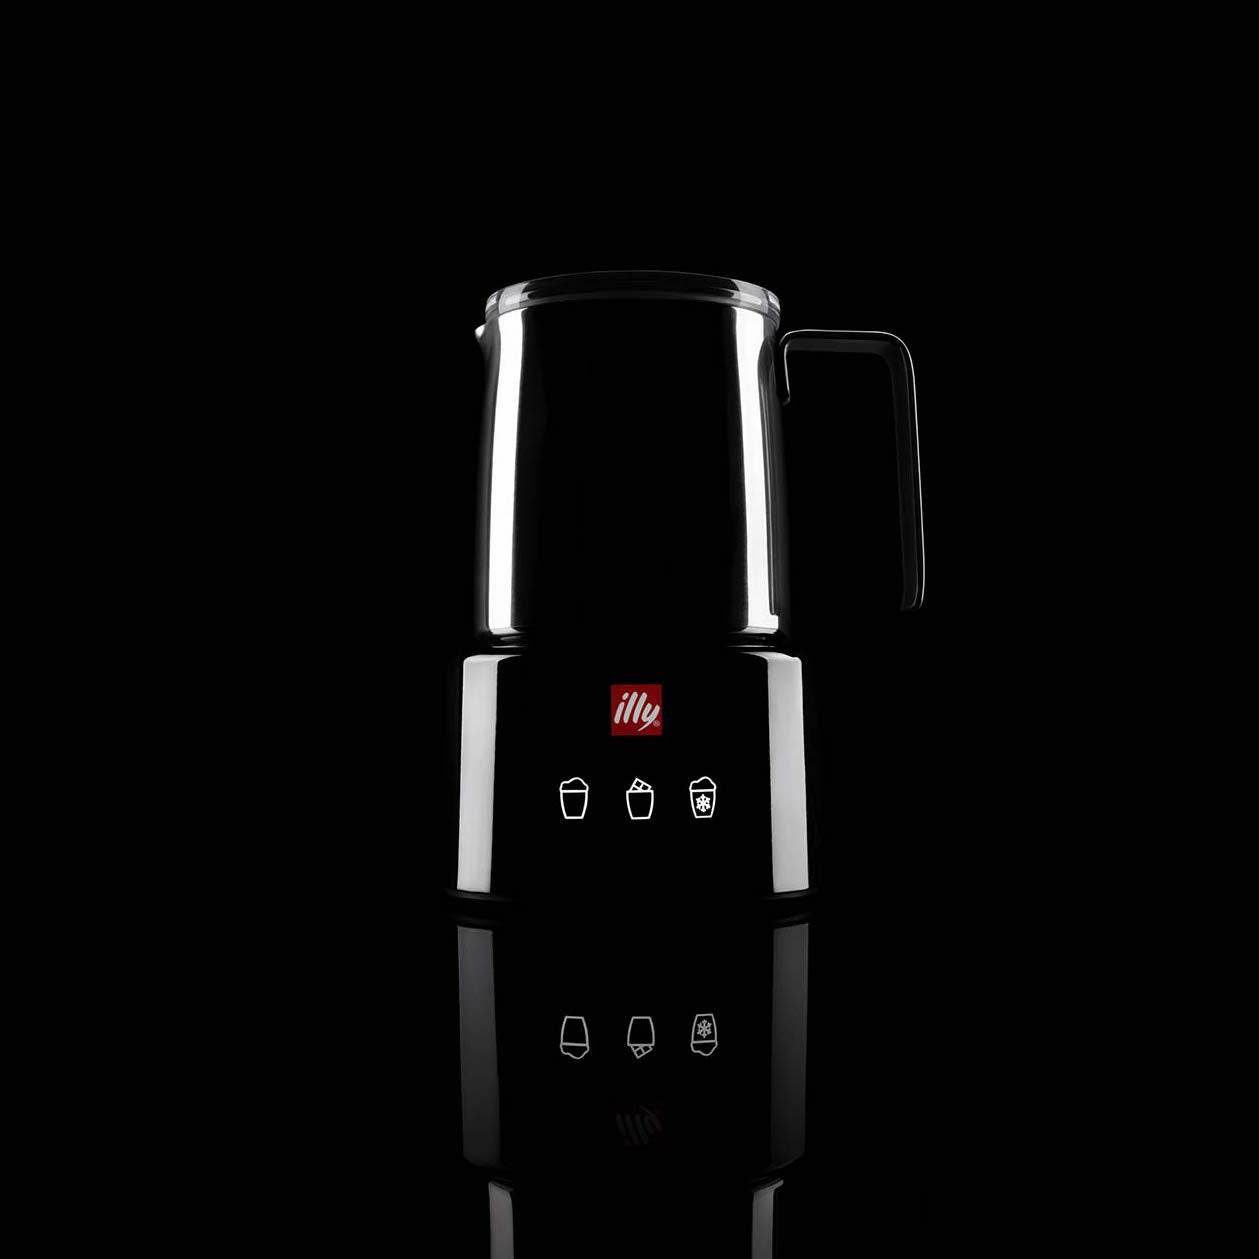 illy Electric Milk Frother - Black & Stainless Steel